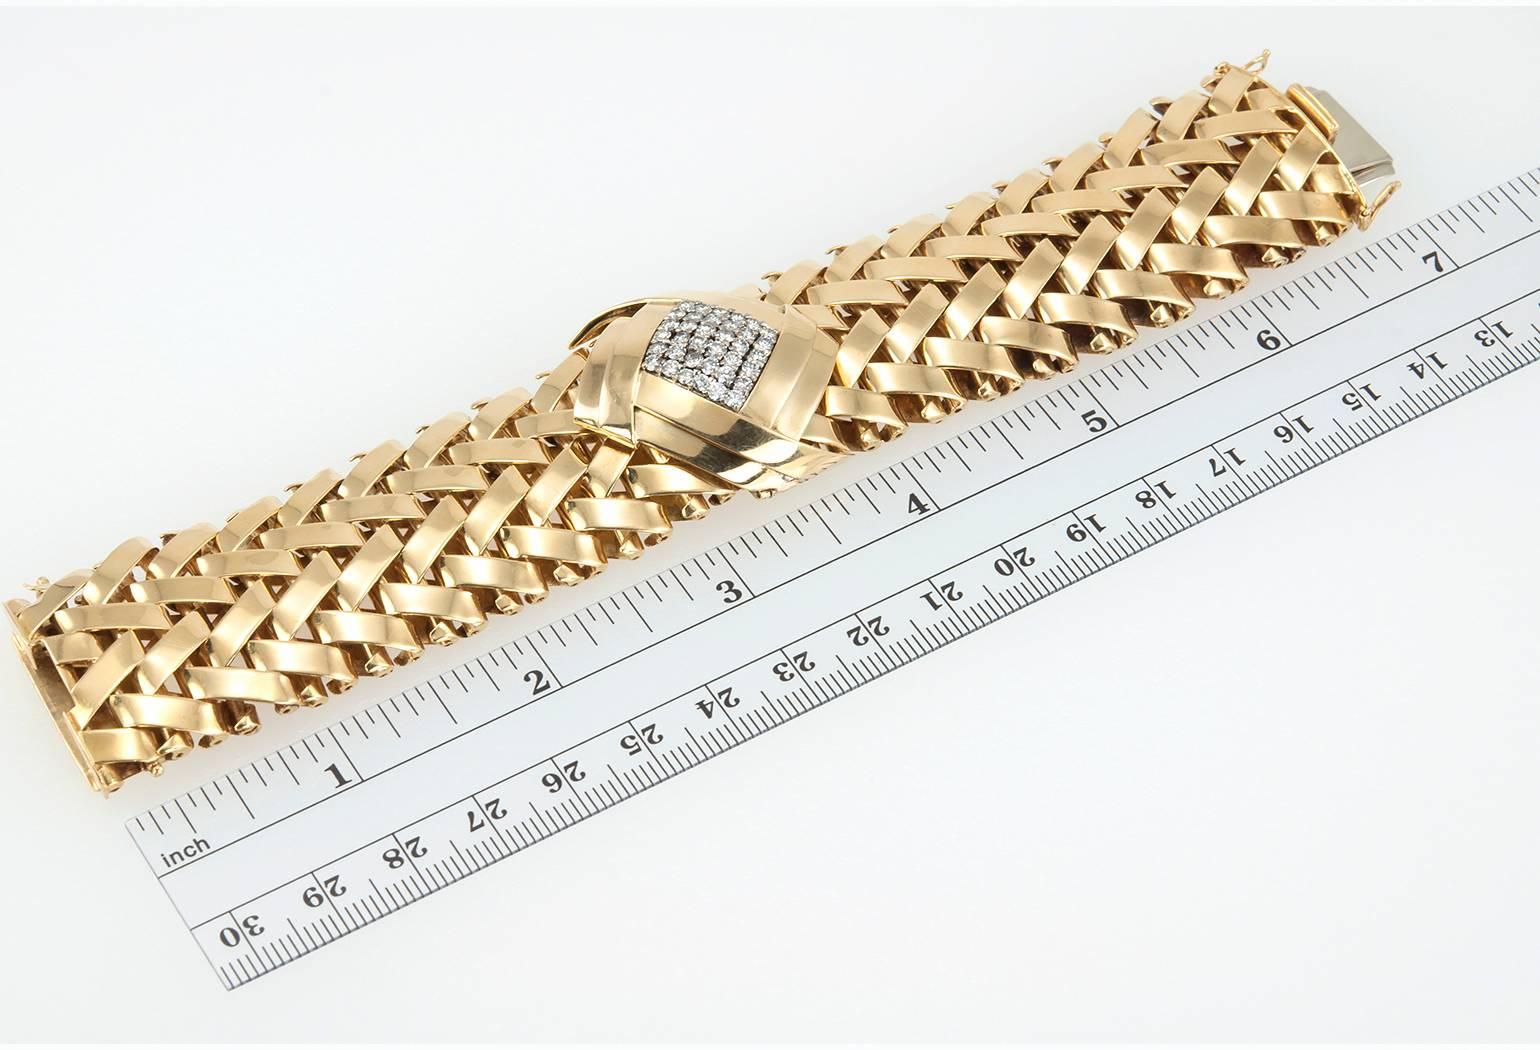 Vacheron & Constantin ladies 18 karat yellow gold woven style bracelet with hidden watch. This magnificent piece features 36 round brilliant cut diamonds, totaling approximately 1.50 carats of diamonds that are G/H in color and  VS2 in clarity. The